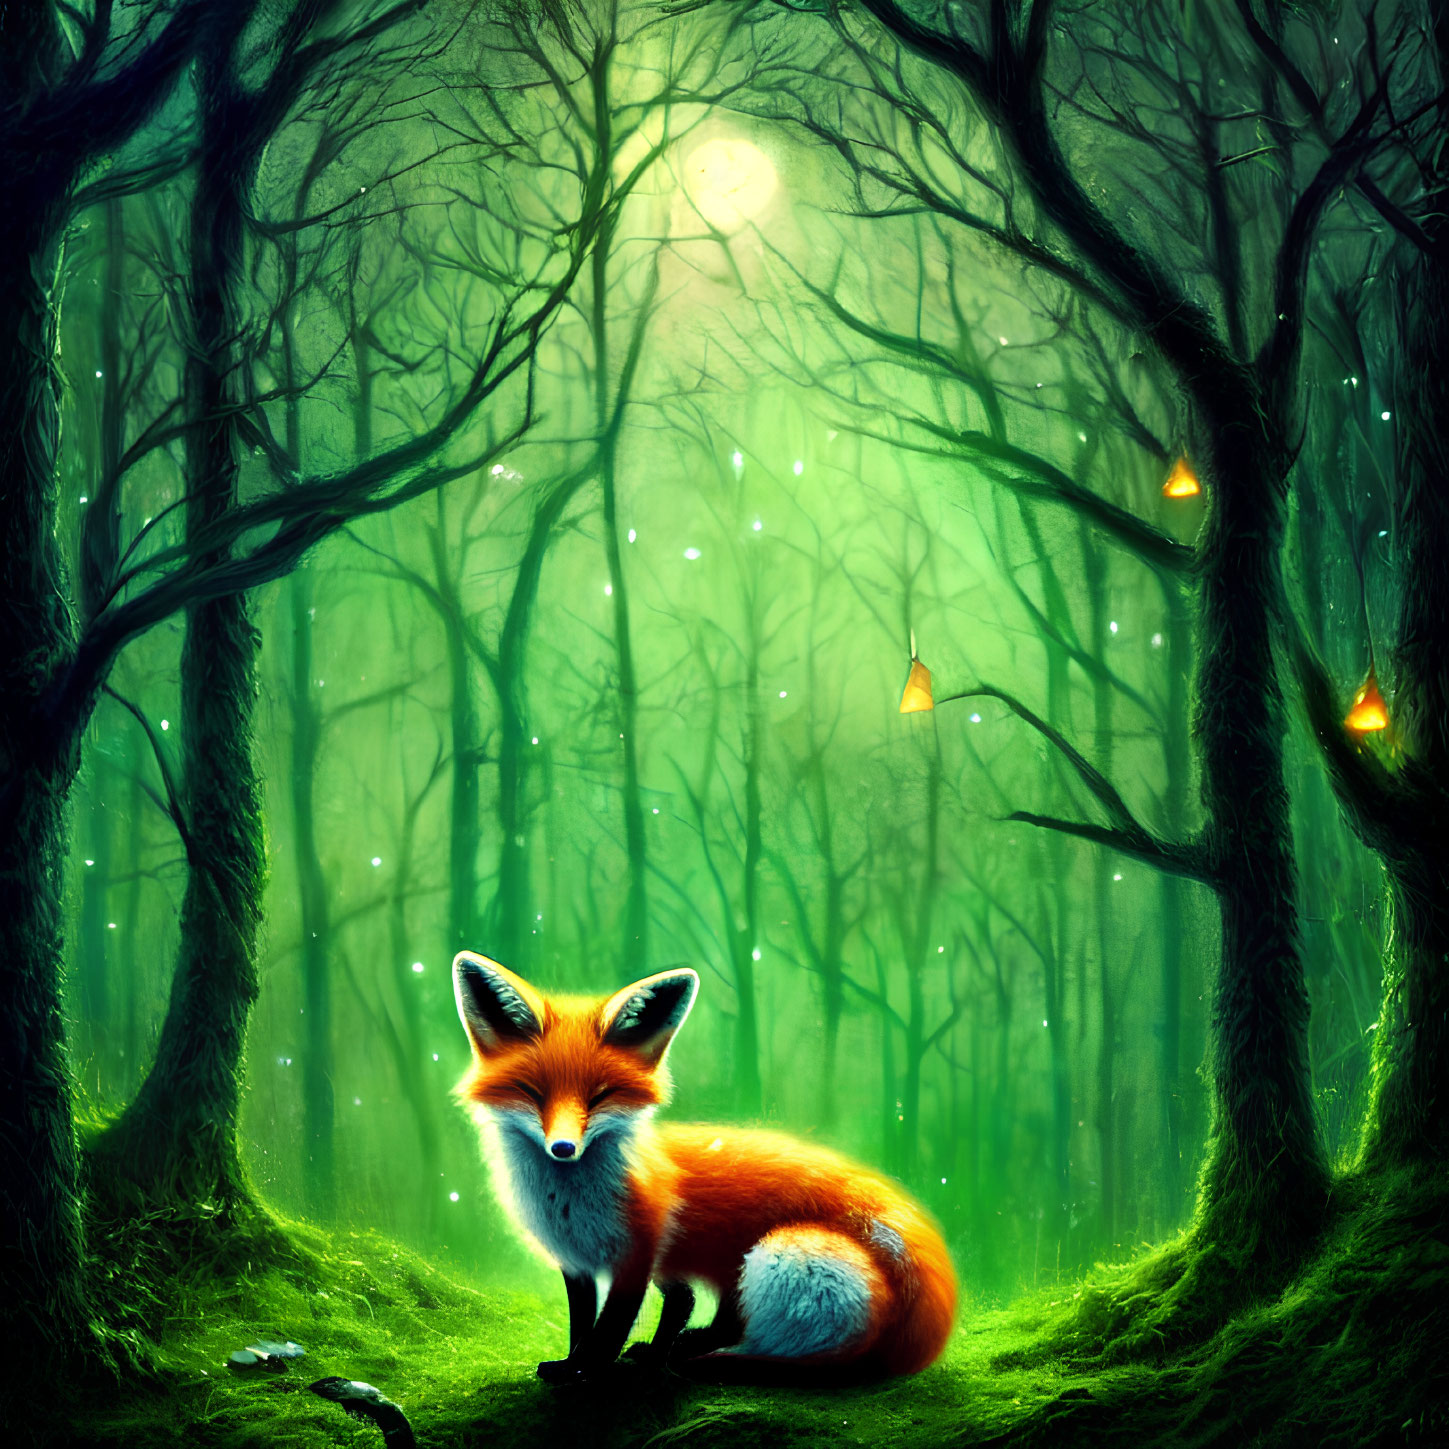 Enchanted forest scene with fox, lanterns, and mystical ambiance